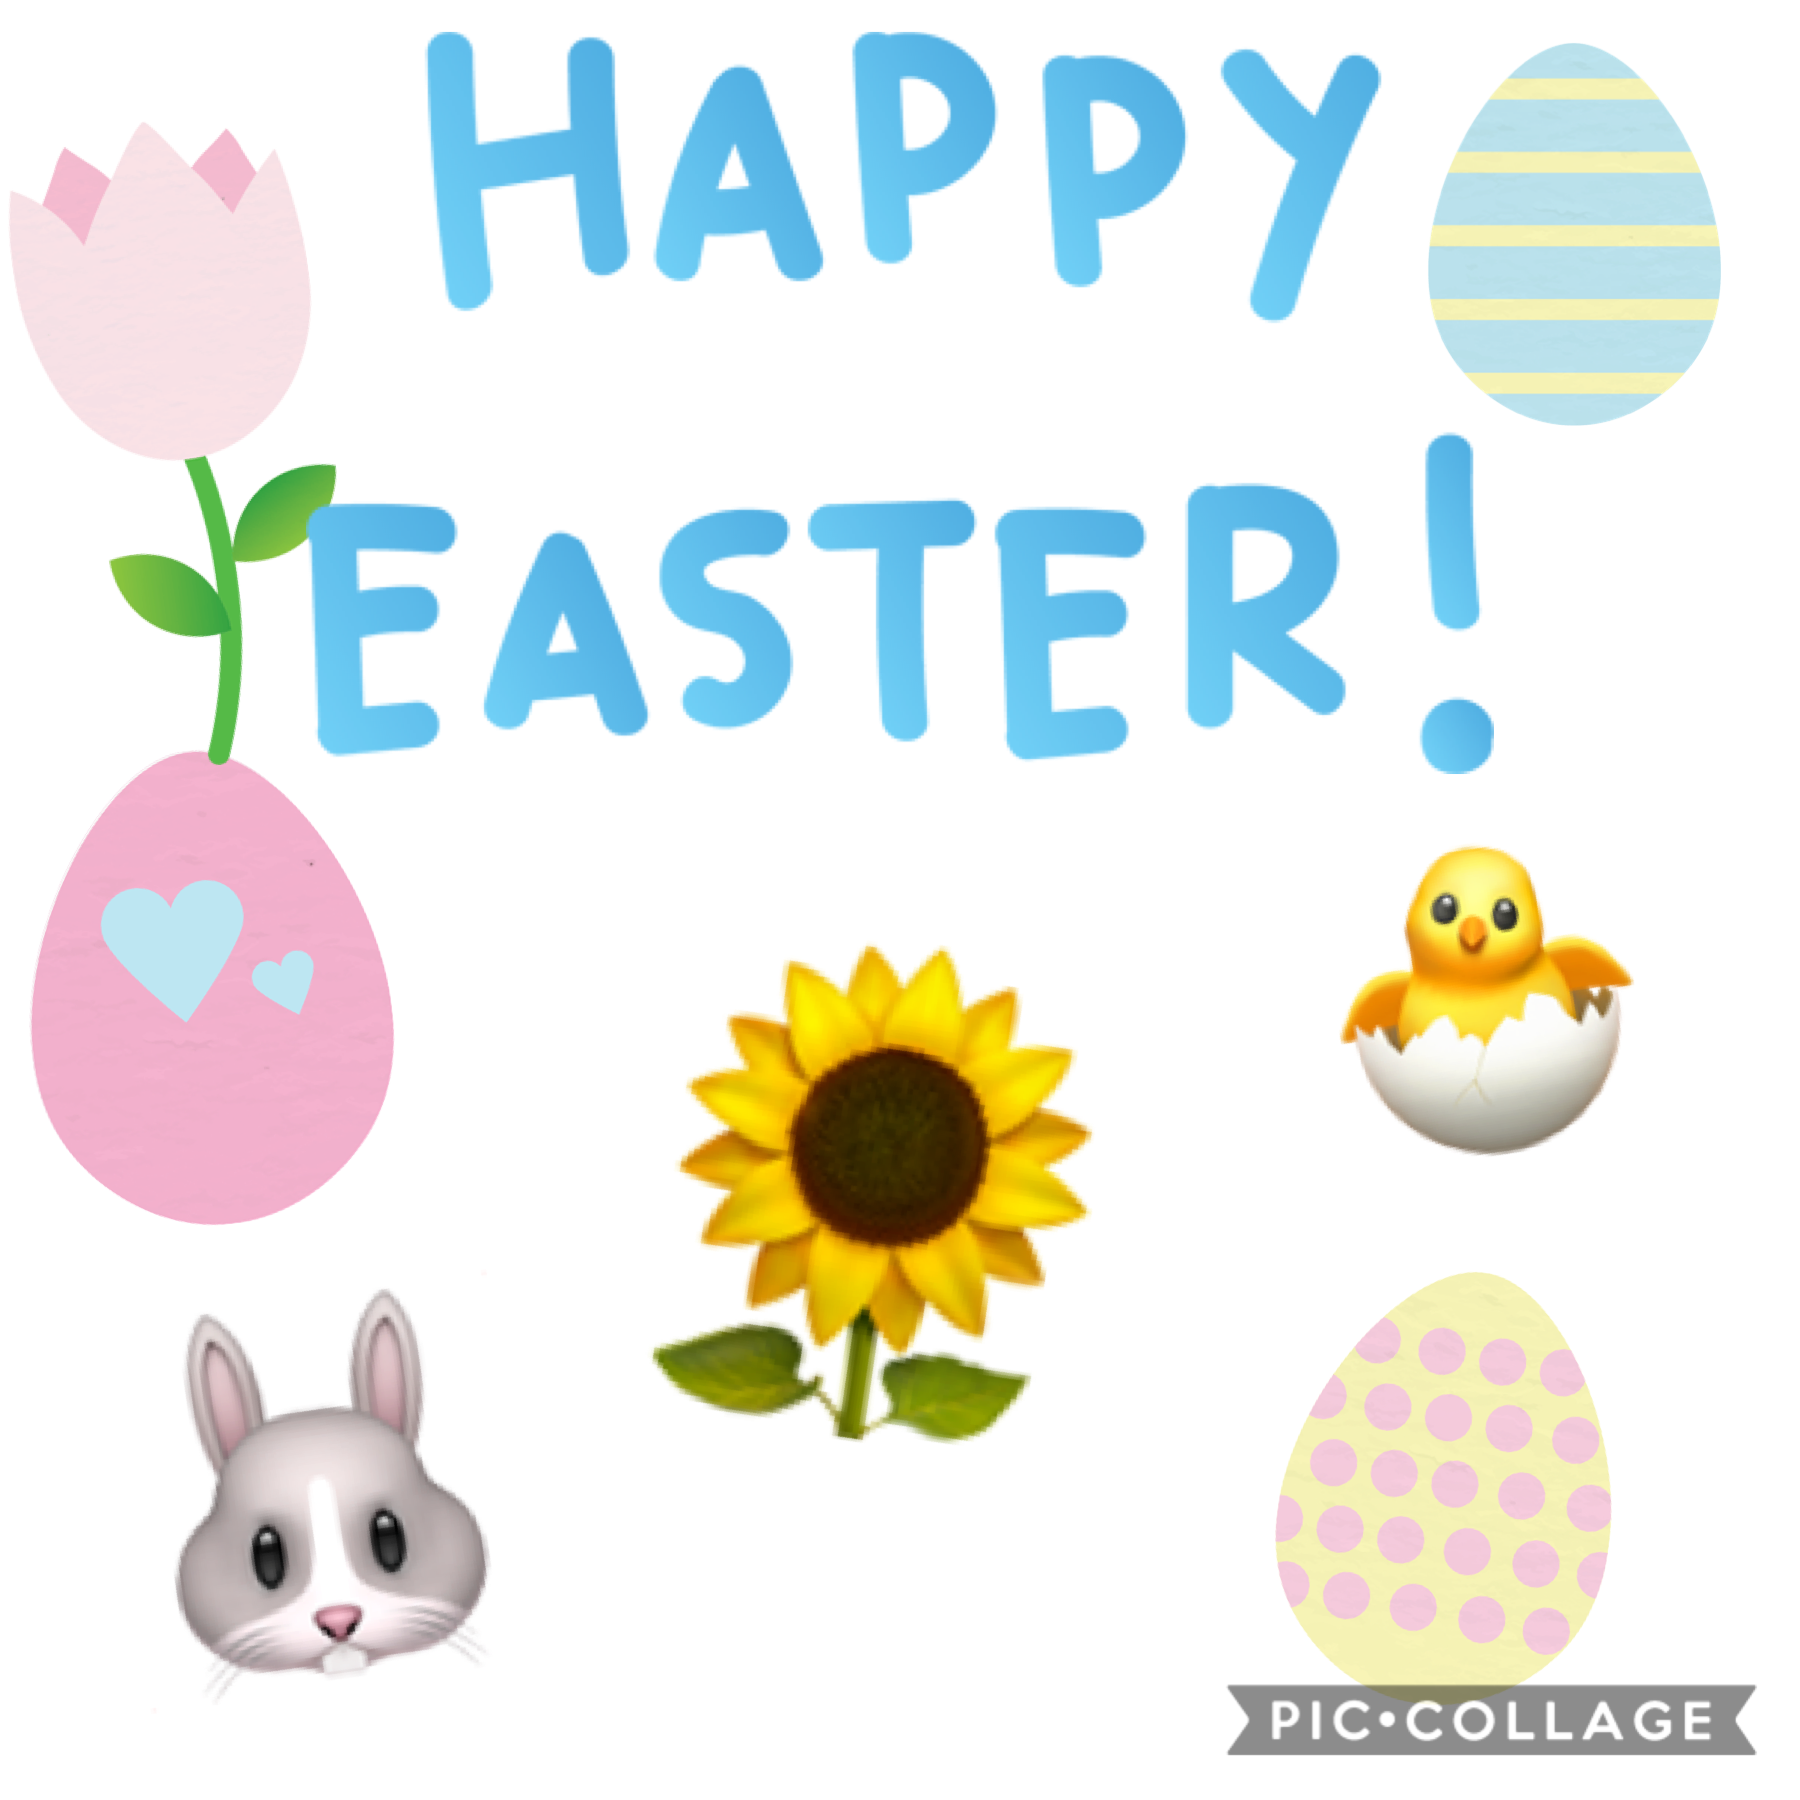 Sorry I’ve not posted in ages. Happy Easter!!! 🐣🐰🌻🥳